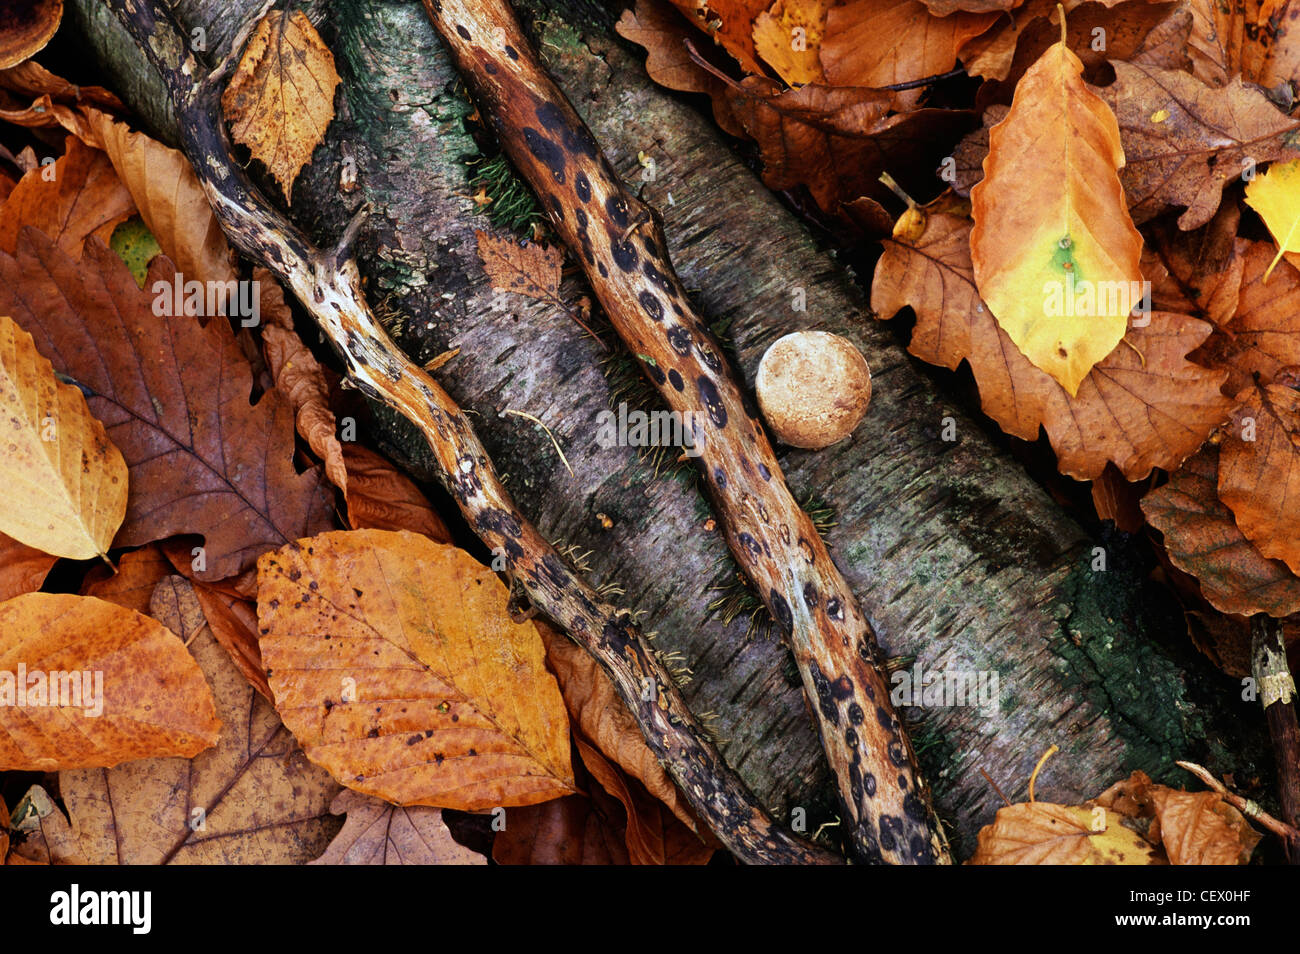 Autumn leaves and fallen Birch on the forest floor. Stock Photo